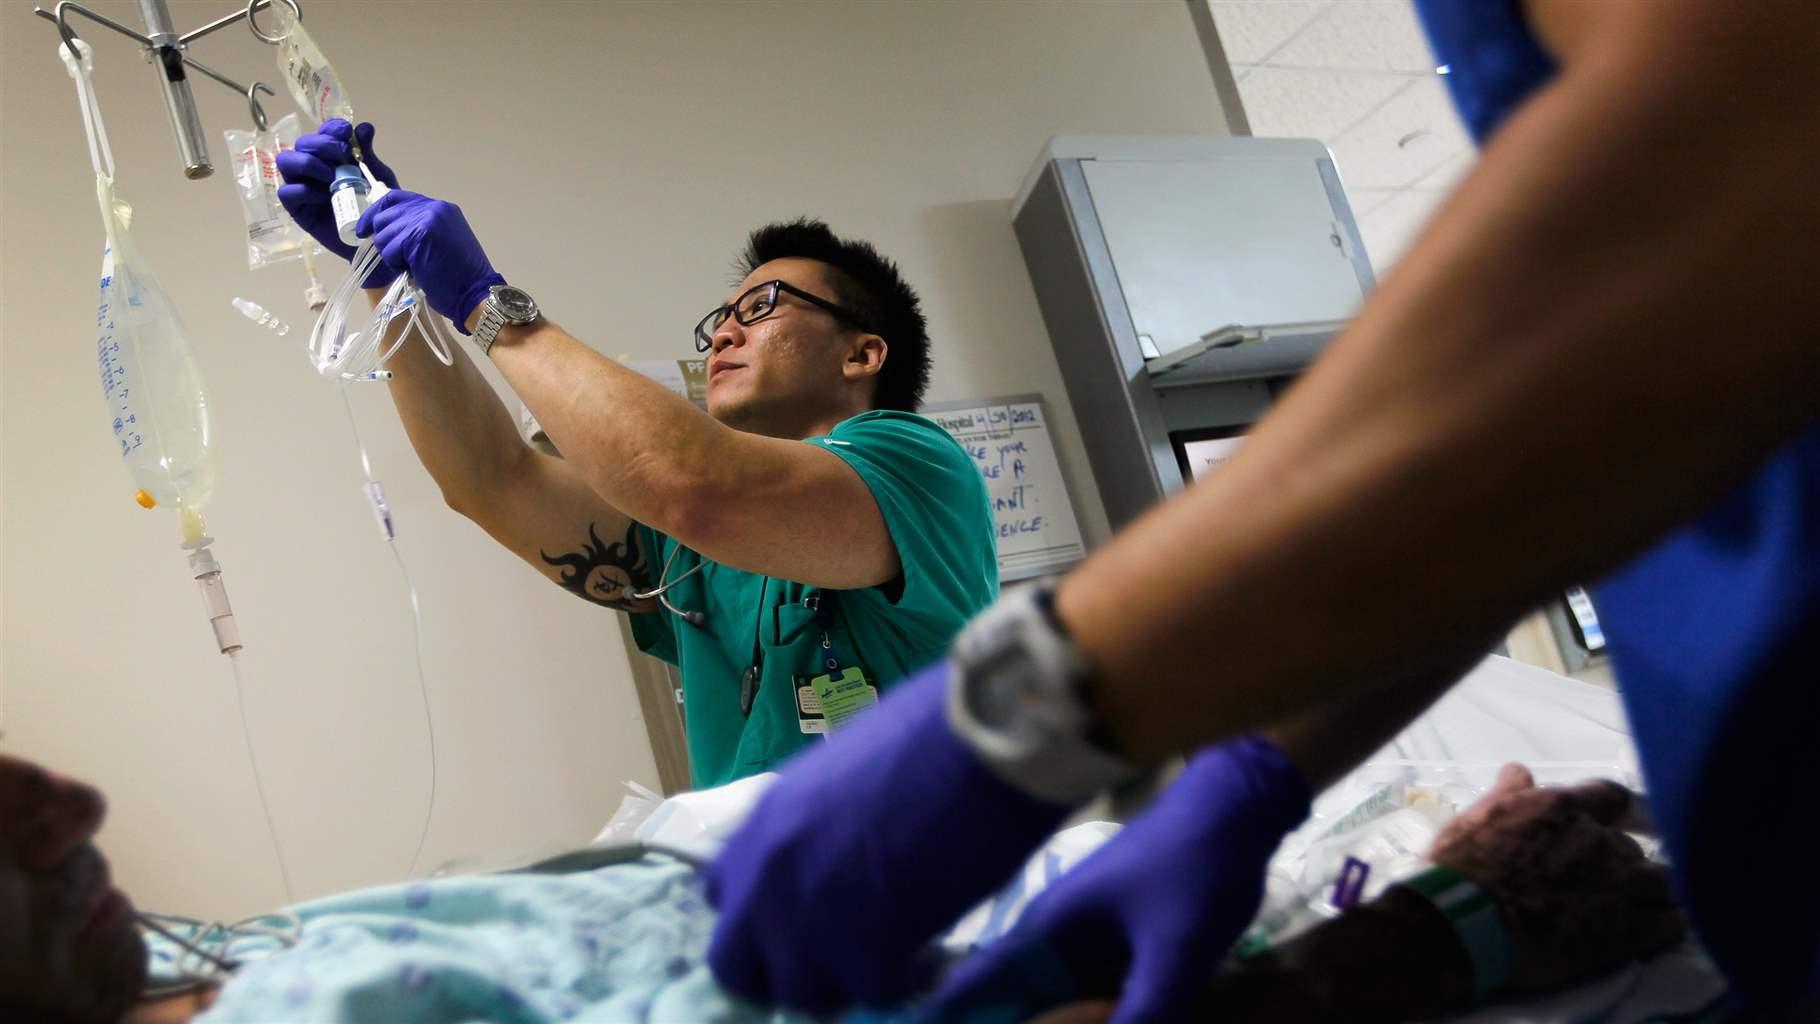 Registered Nurse Tung Tran hangs an I.V. bag for a patient at the University of Miami Hospital's Emergency Department on April 30, 2012 in Miami, Florida.